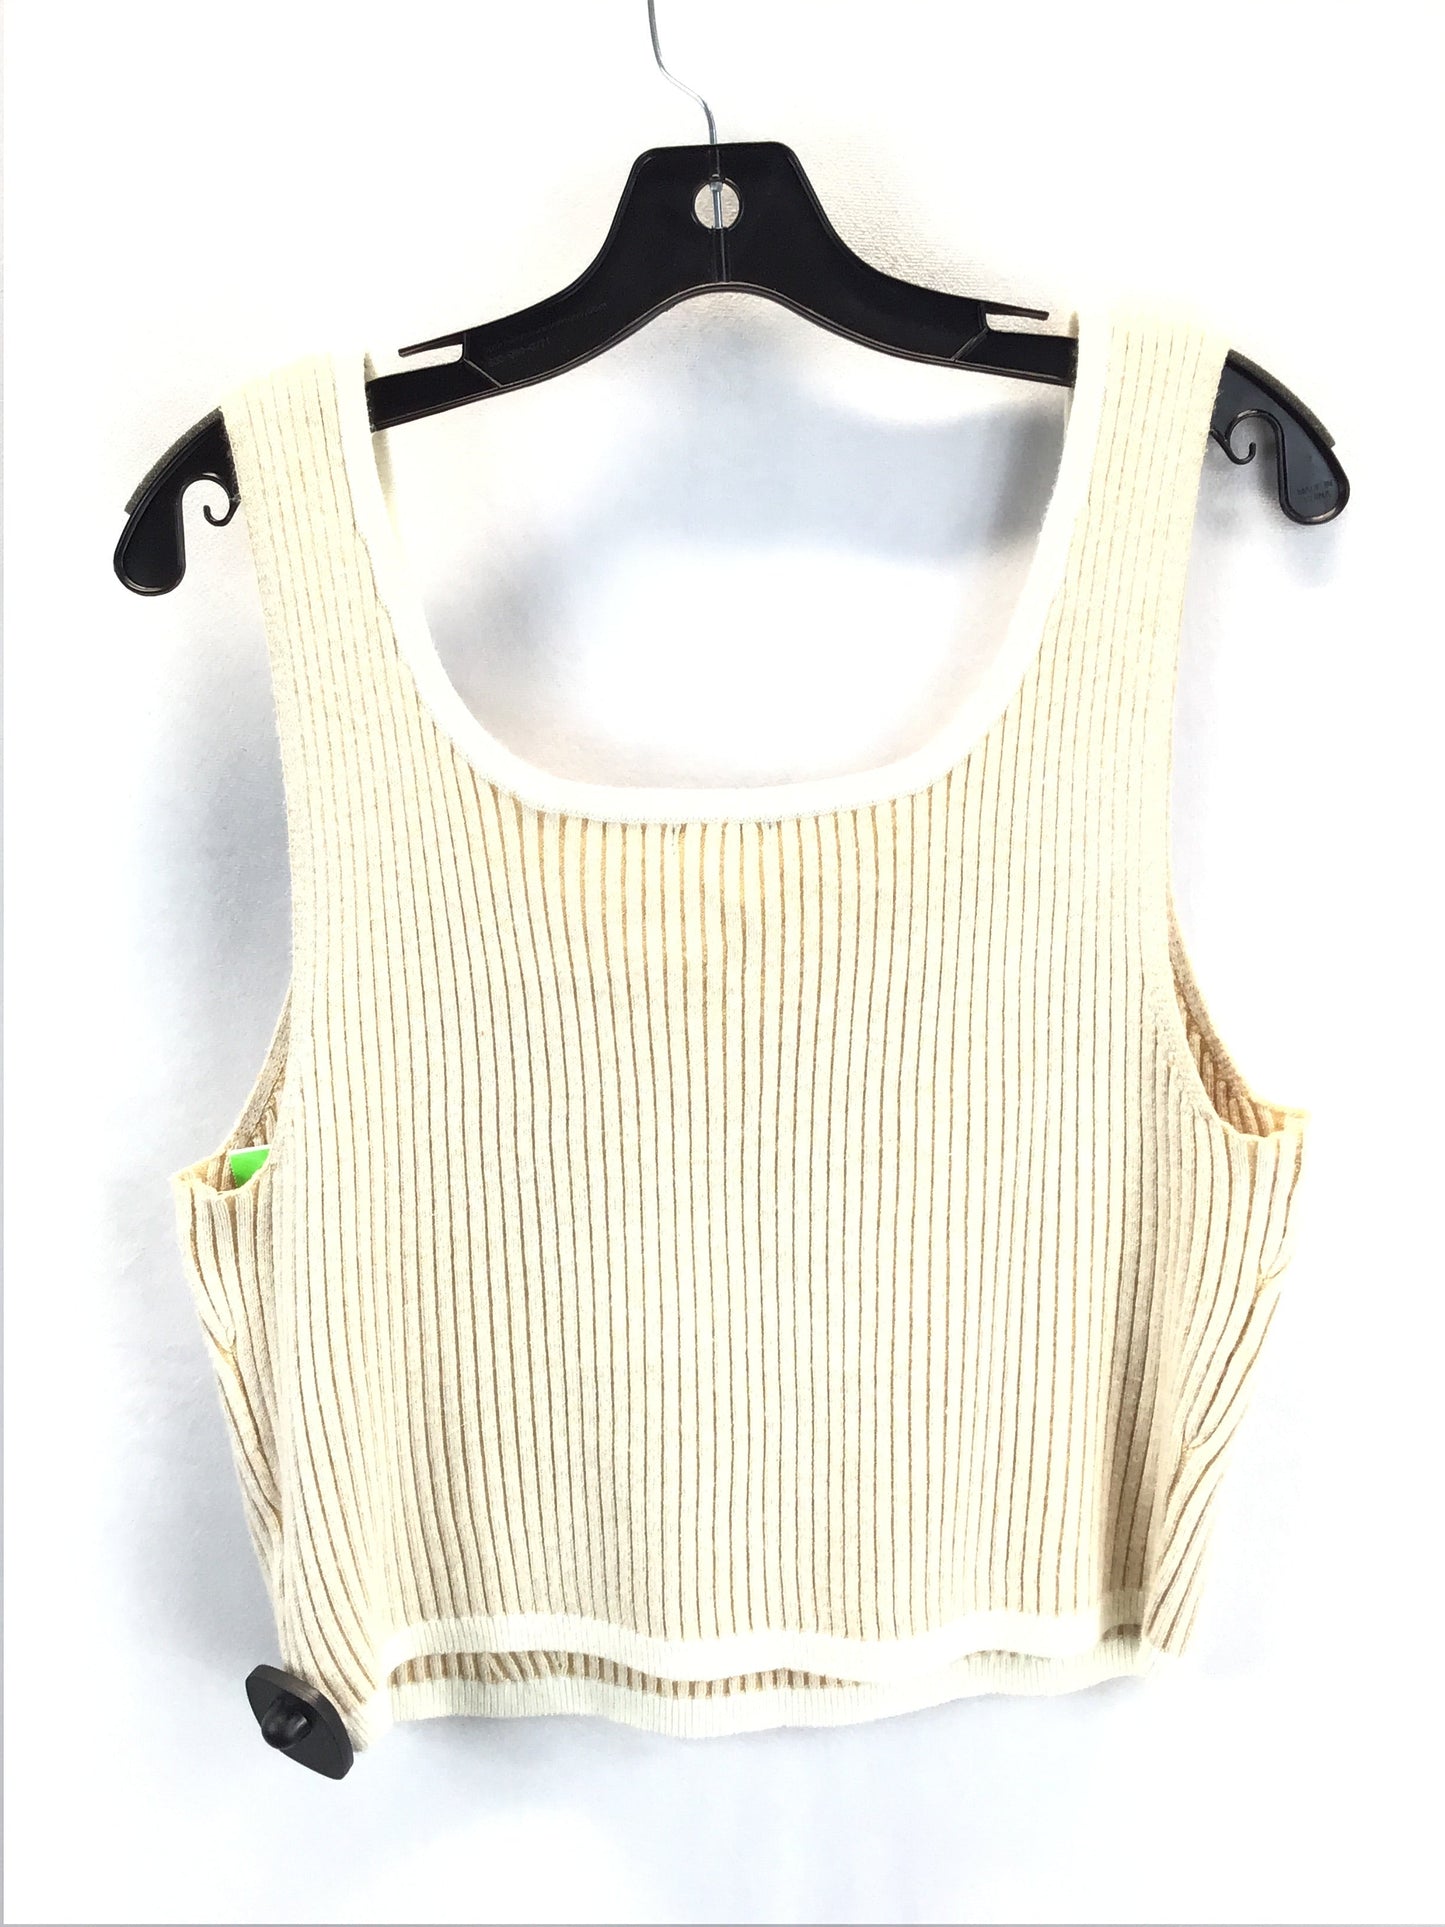 Top Sleeveless By Wild Fable  Size: 2x